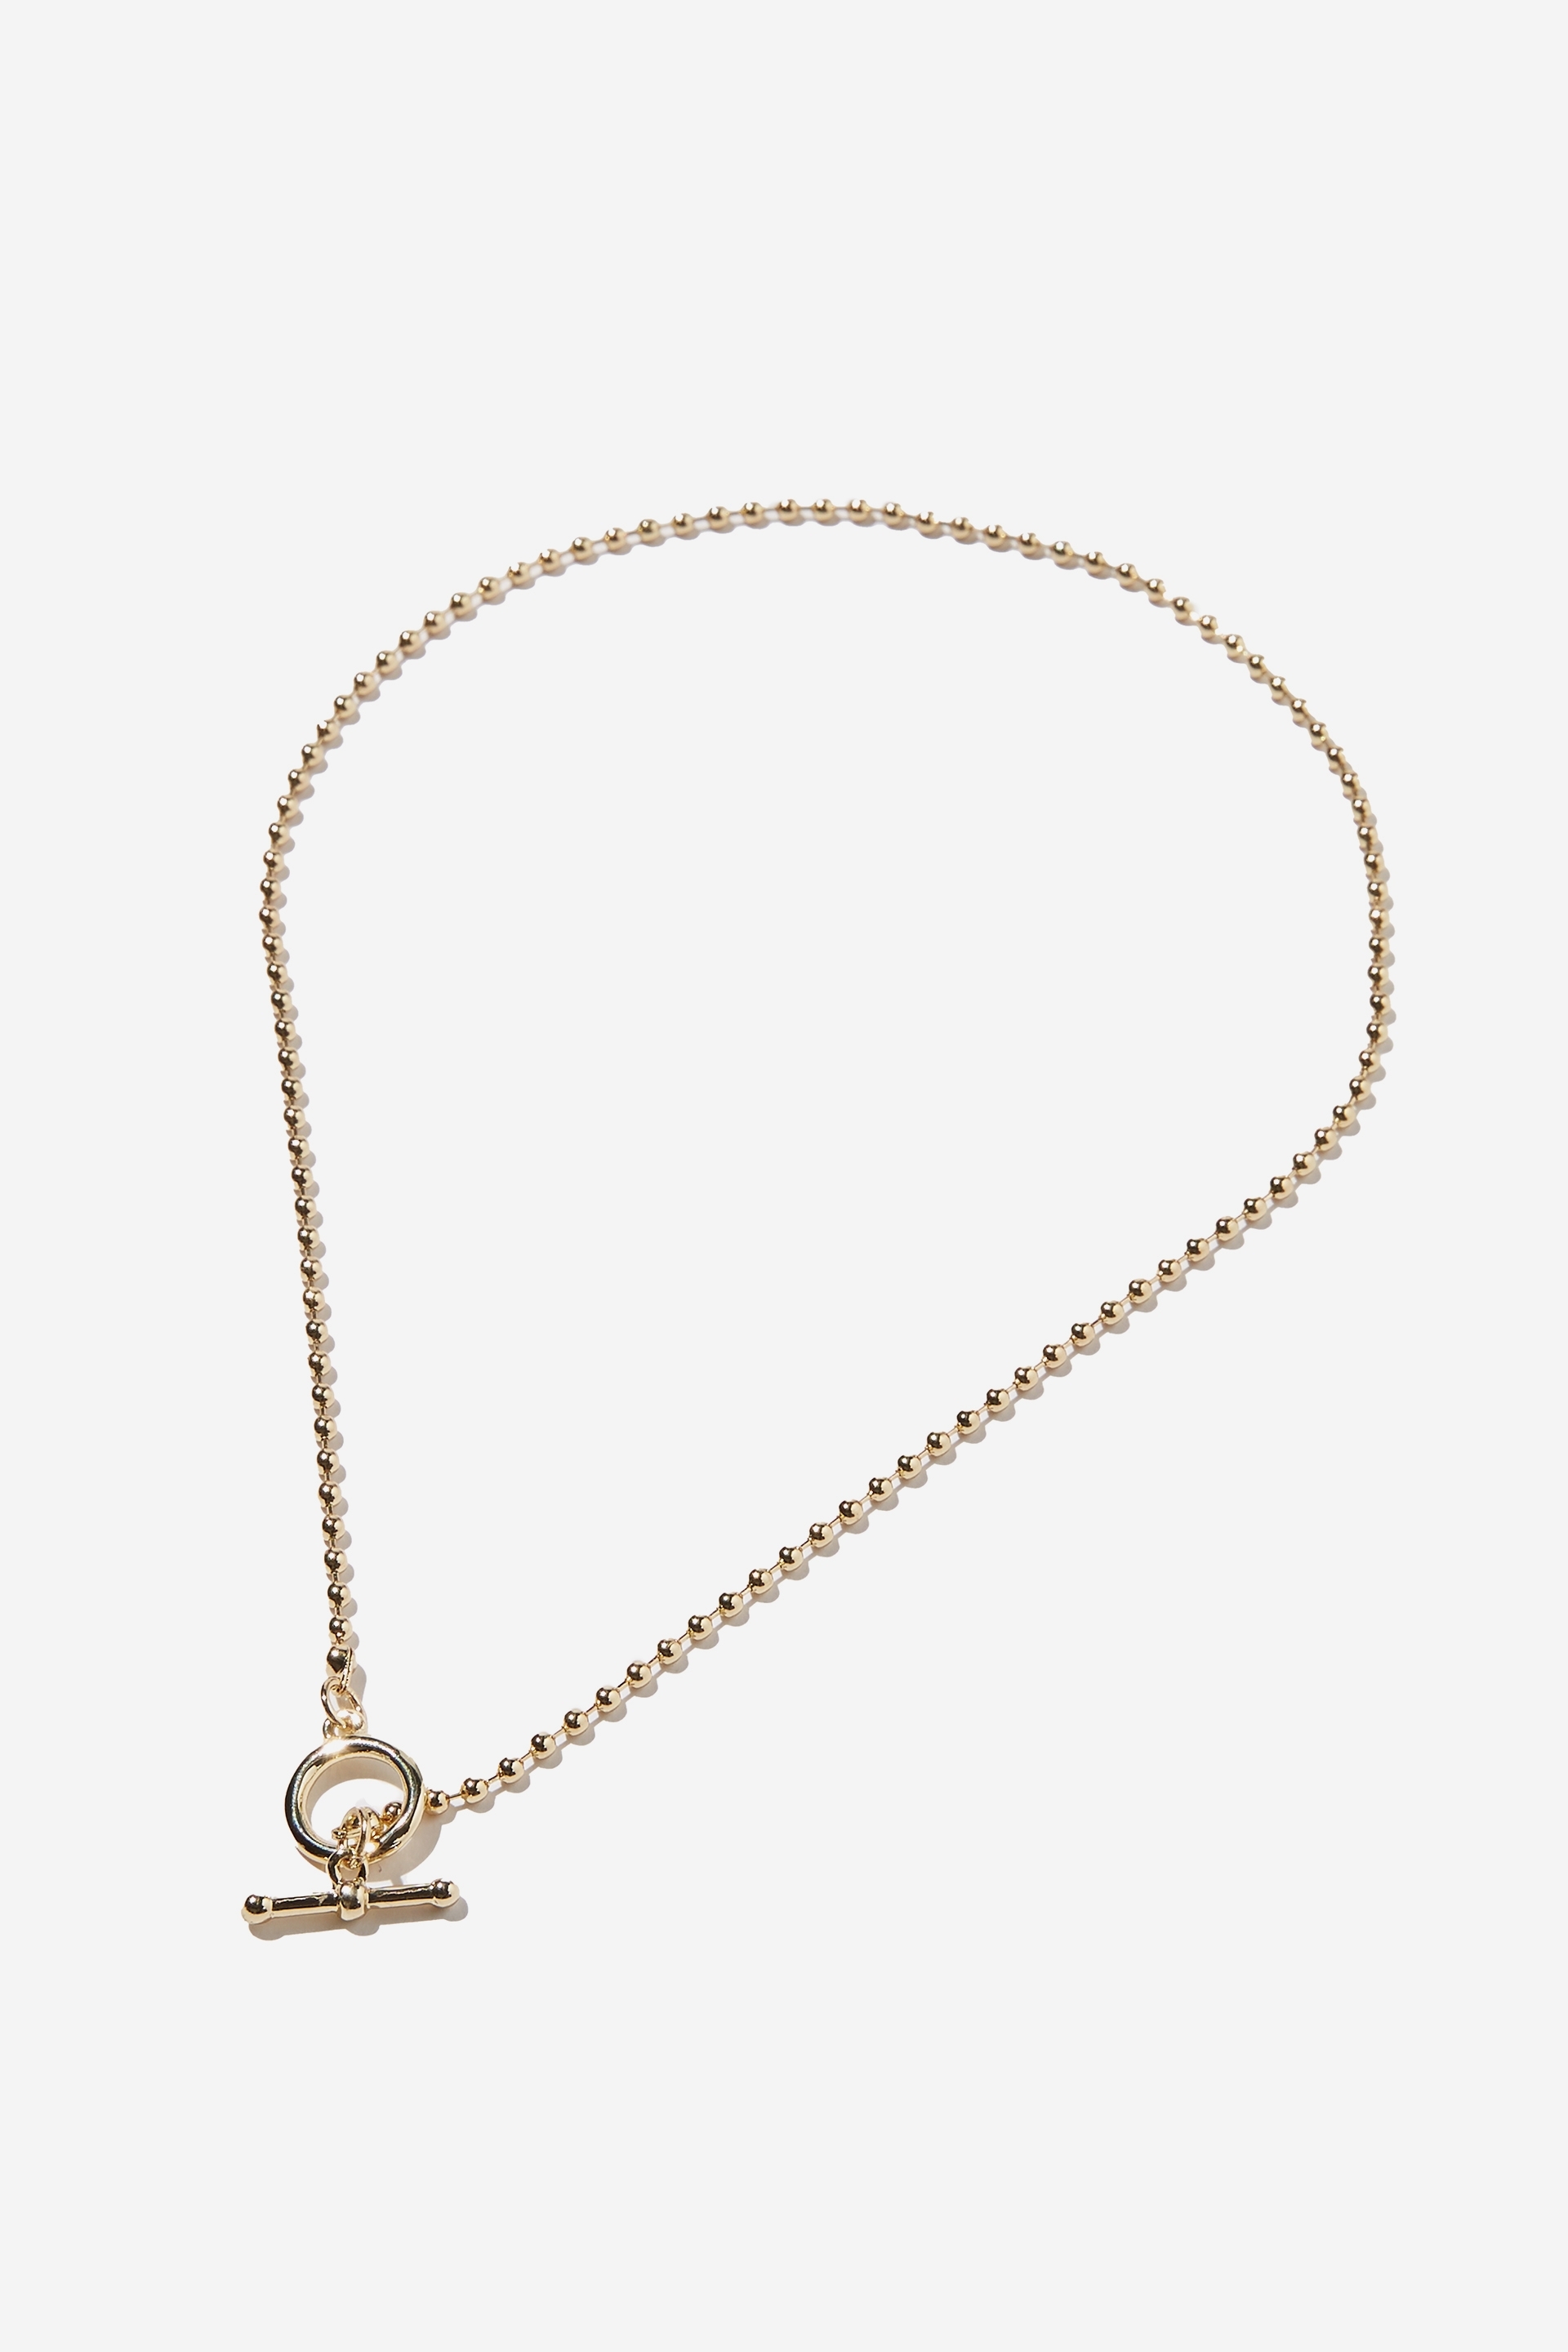 Rubi - Premium Pendant Necklace - Gold plated ball chain with fob